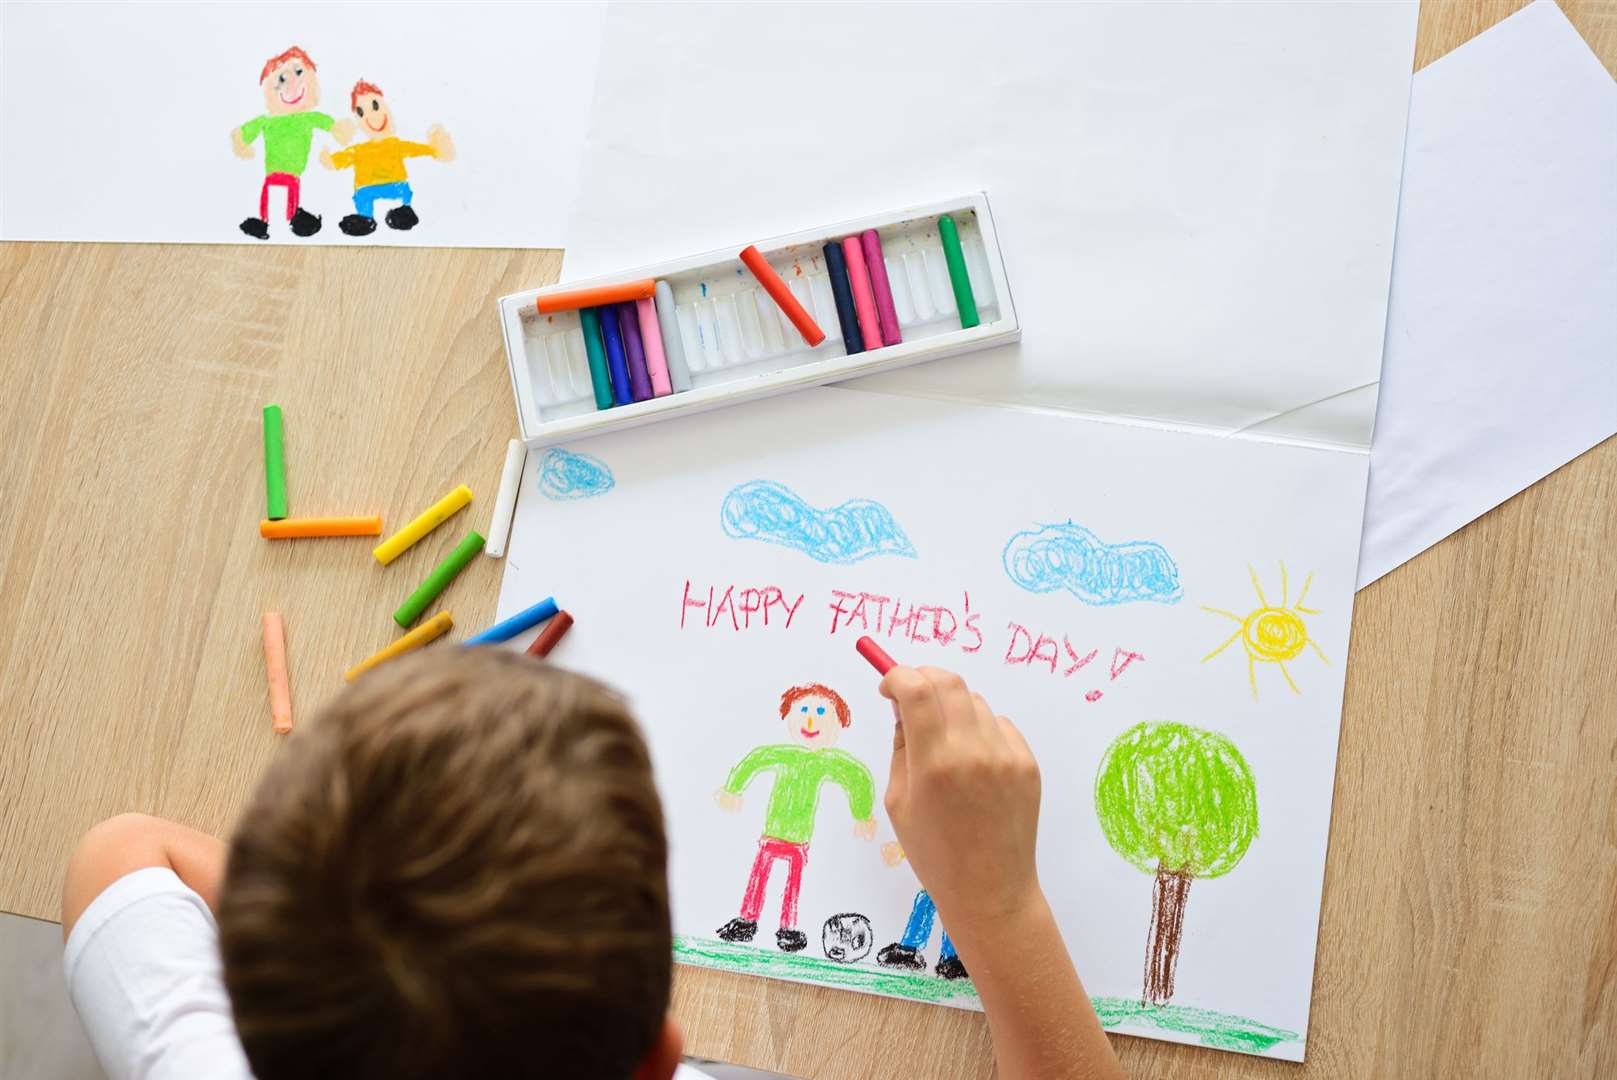 Children across Gravesend and Dartford have drawn pictures for our supplement